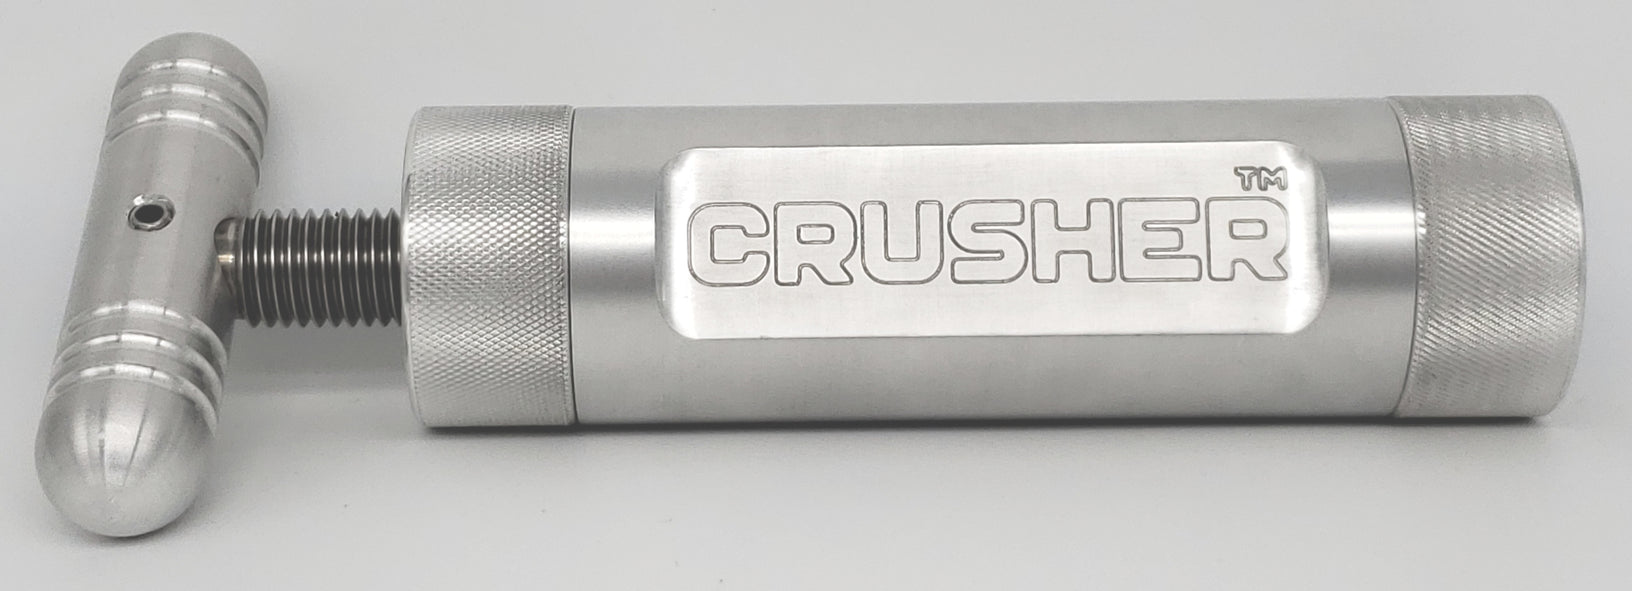 Crusher T Pollen Press from High Tech Pipes